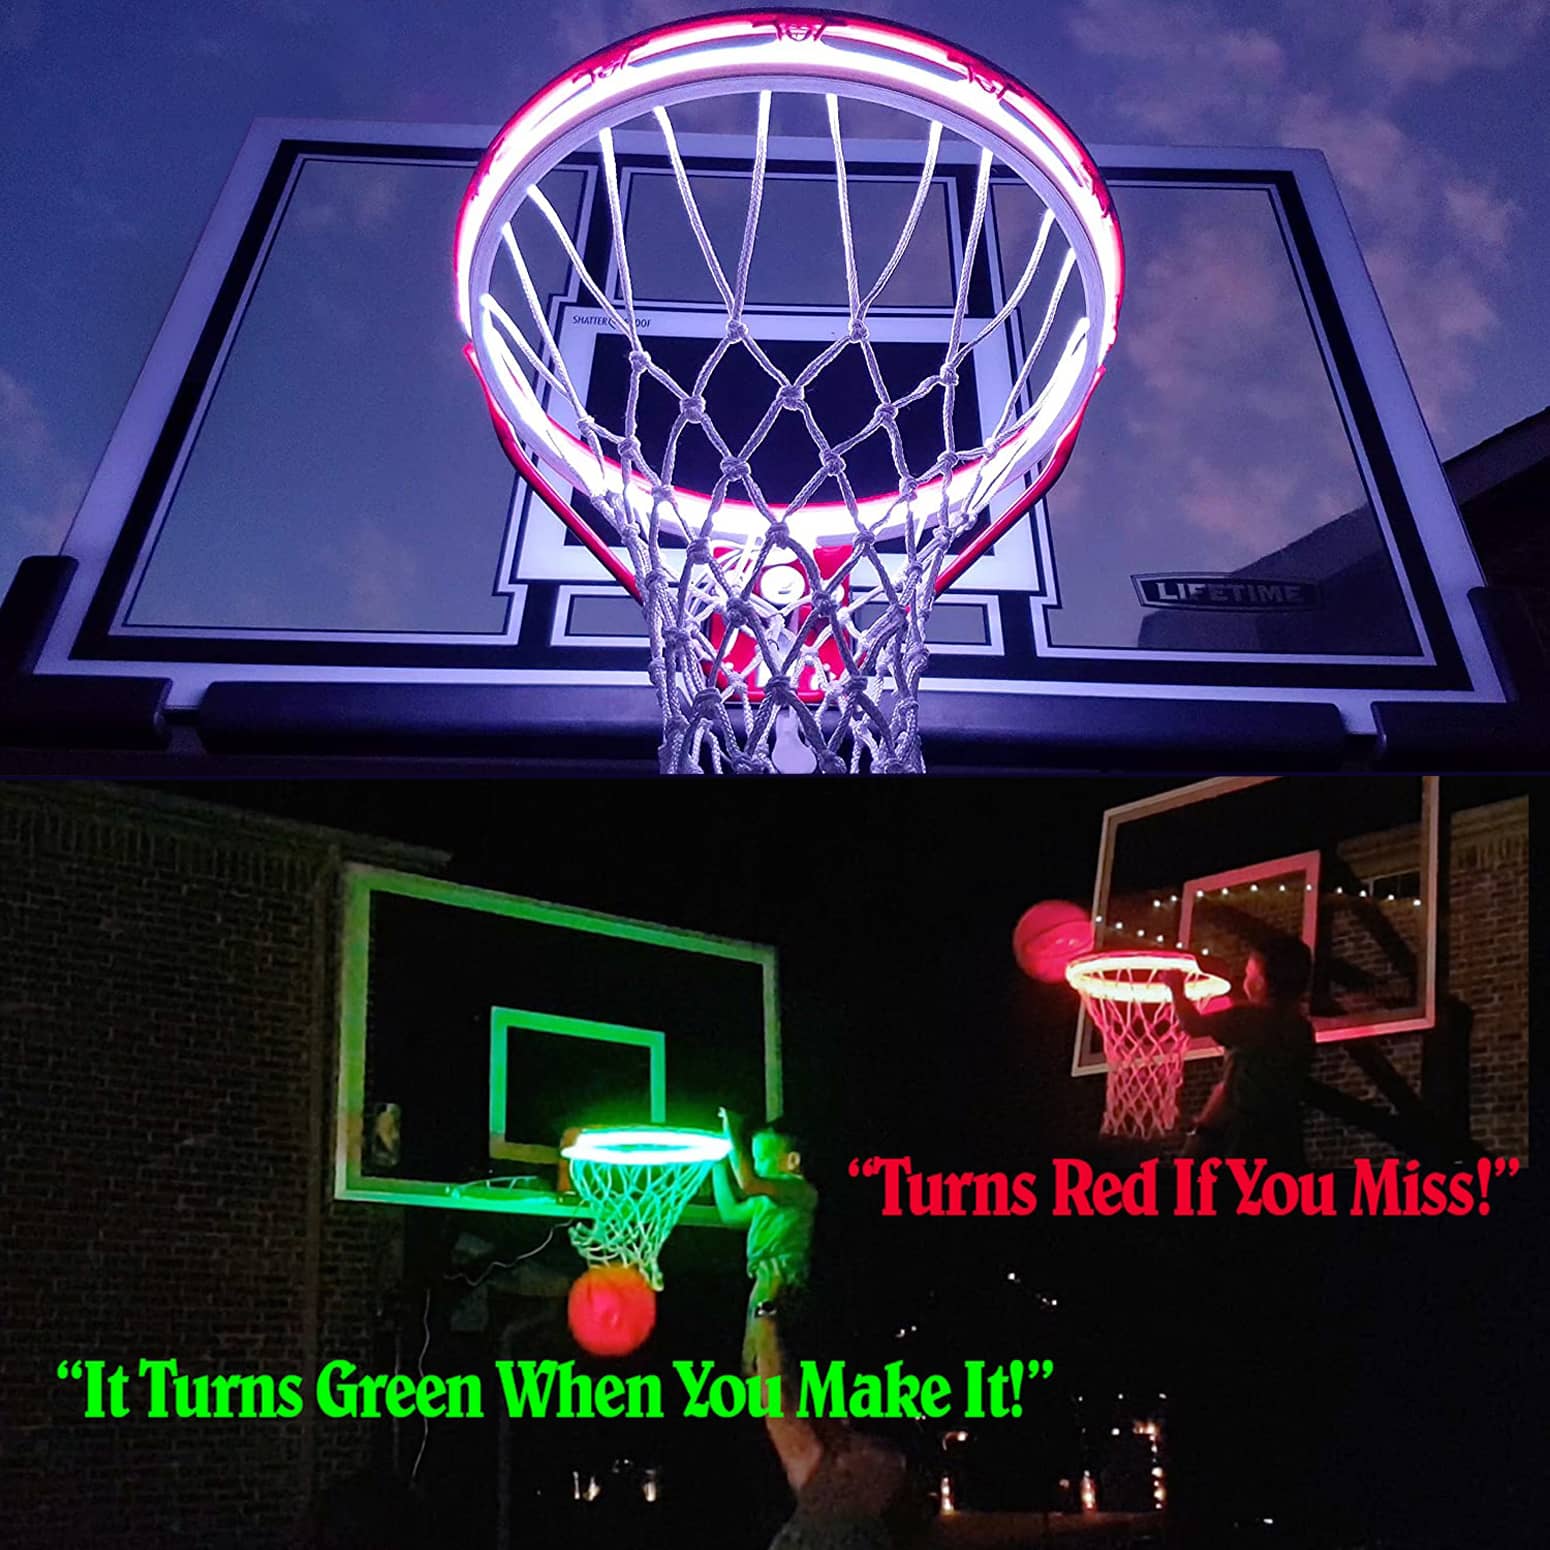 Illuminates When You Score 8 Unique Patterns HOME SMART BRITE HOOPS Multi-Colored LED Basketball Rim Lights for All-Day Play Red Solar Powered Blue & Green Colors Water-Resistant 